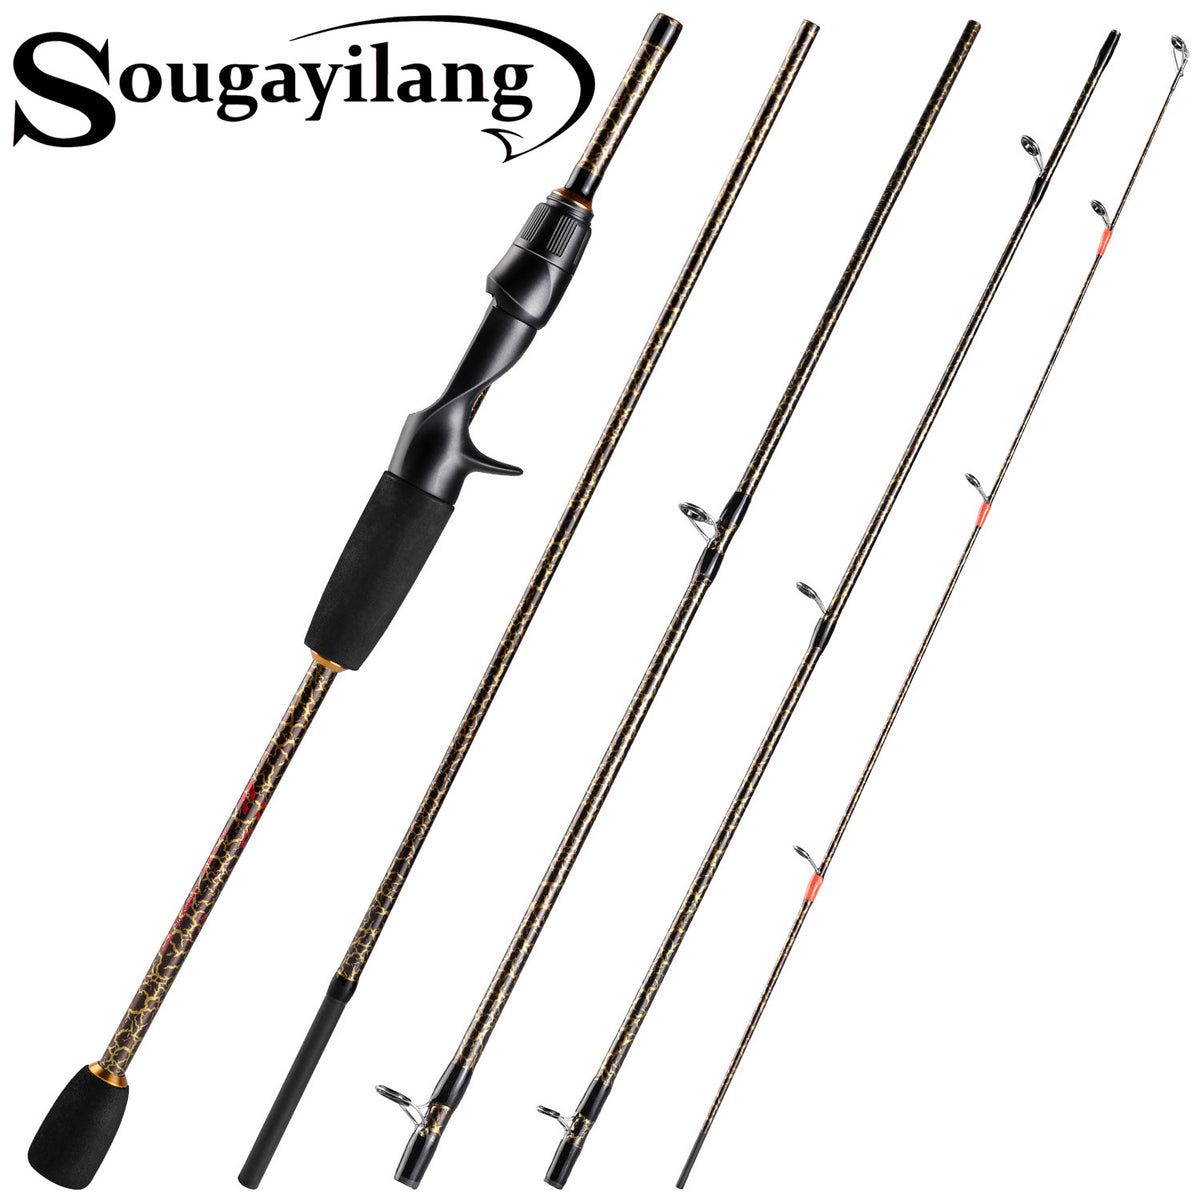 Sougayilang 5 Section Portable Fishing Rod1.8-2.4m Ultralight Carbon Fiber  Spinning/Casting Travel Fishing Rods Fishing Tackle